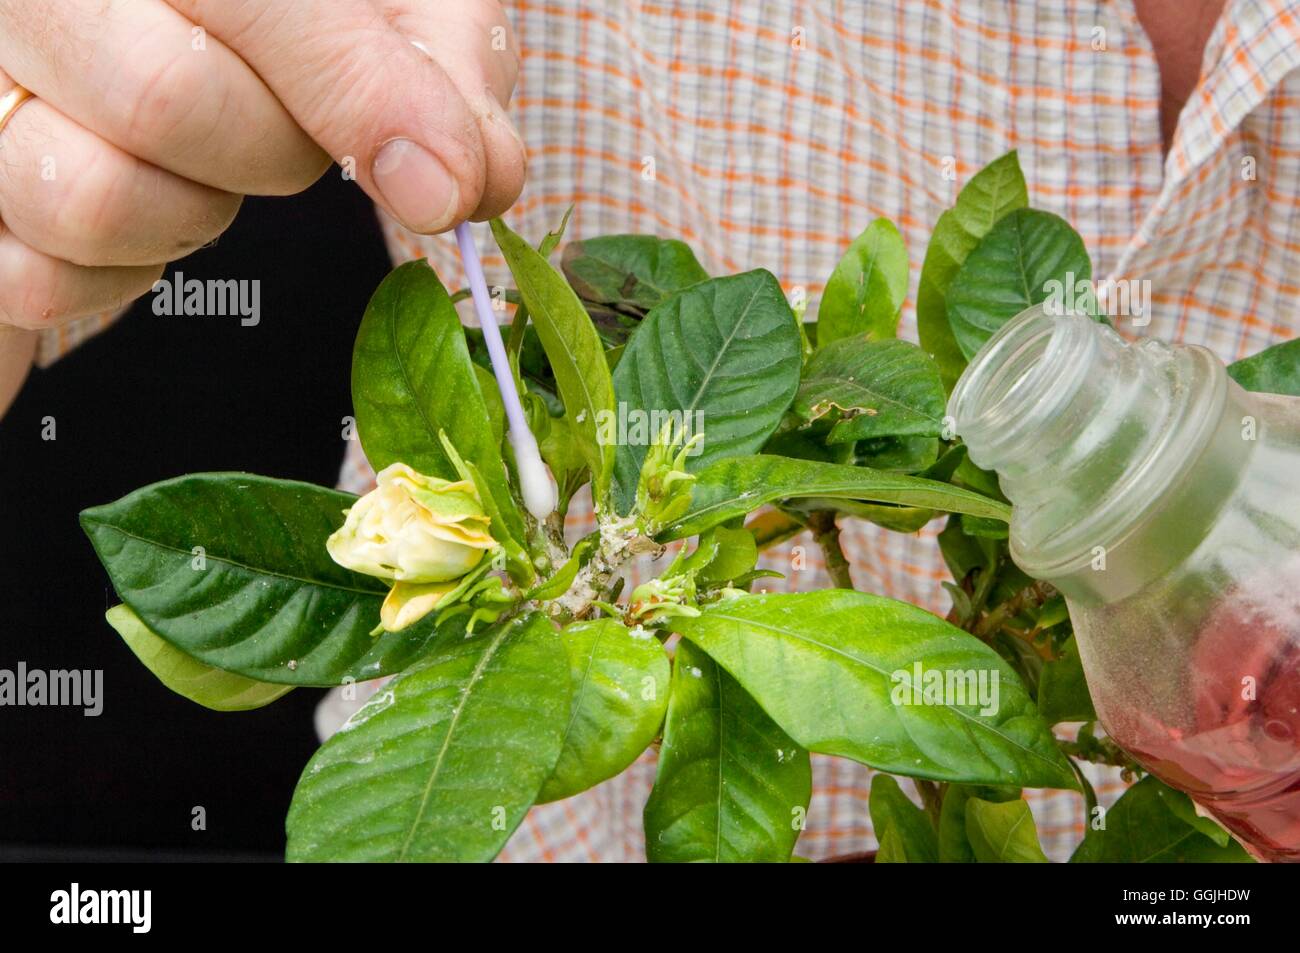 Protection Against Pests- - Removing Mealy Bug using Methylated Spirit   MIW253130     Photos Hortic Stock Photo